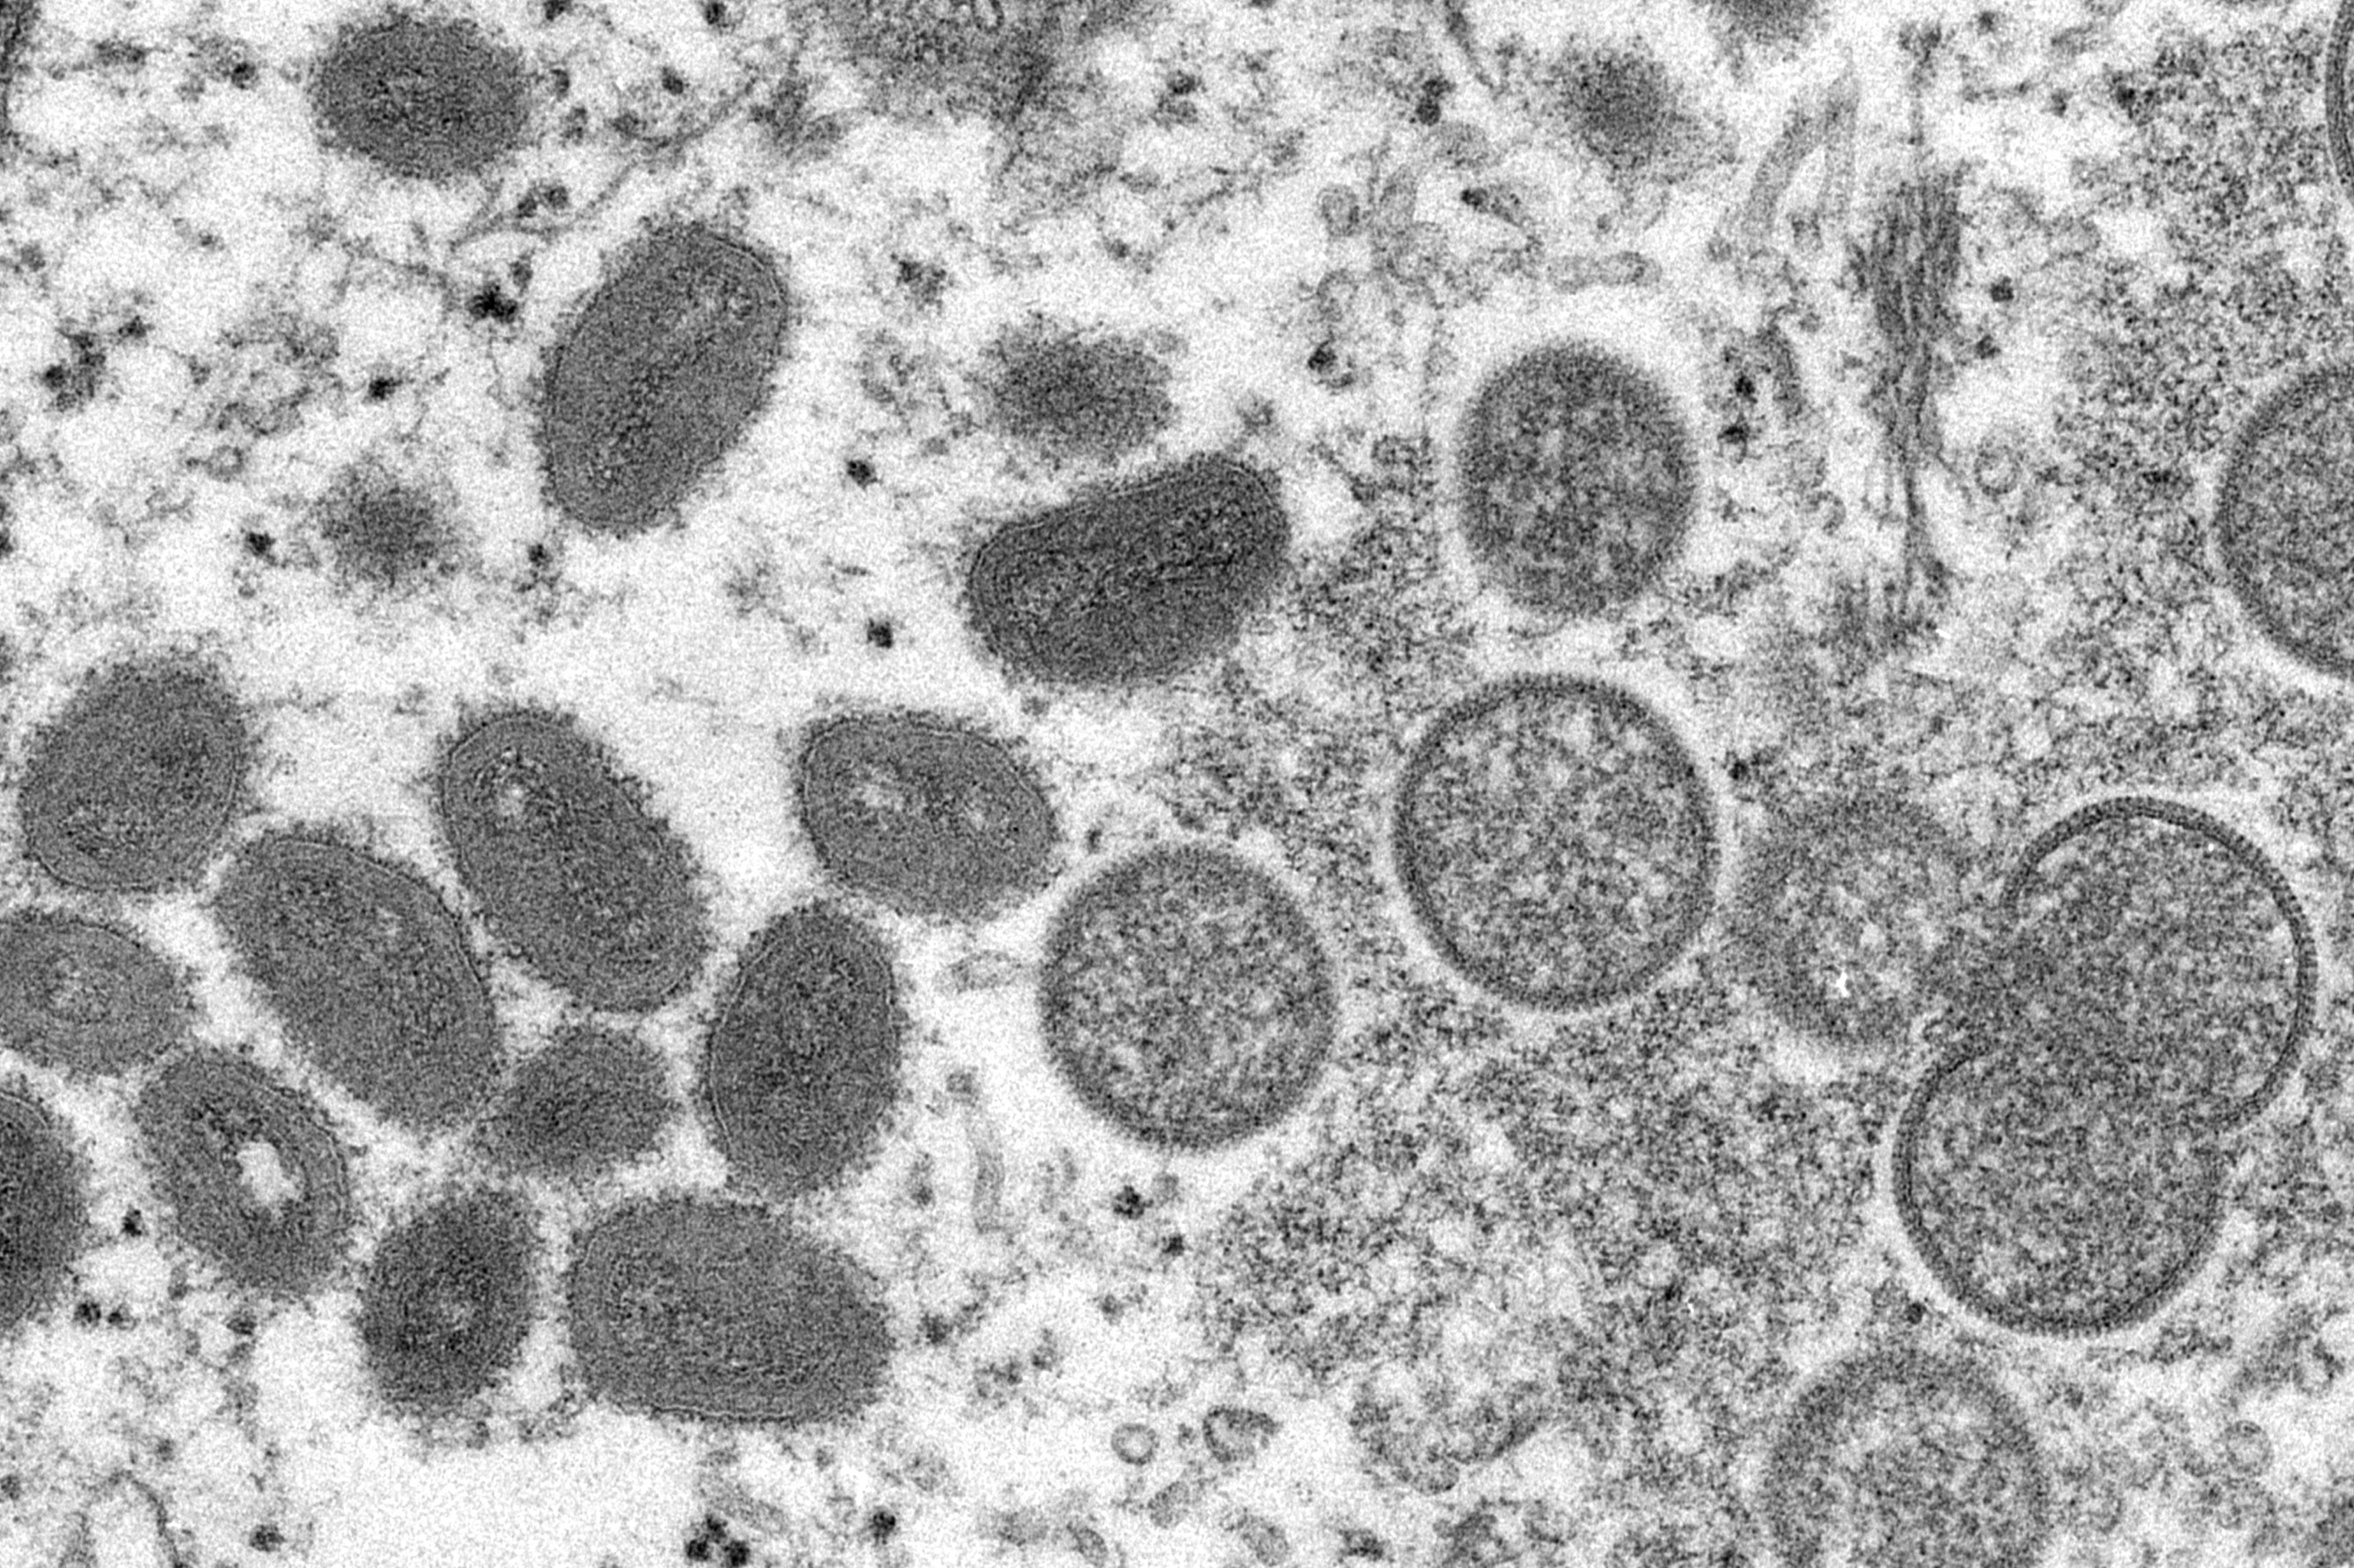 China’s General Administration of Customs has announced new prevention measures in an attempt to stop monkeypox being introduced into China. Photo: CDC via AP